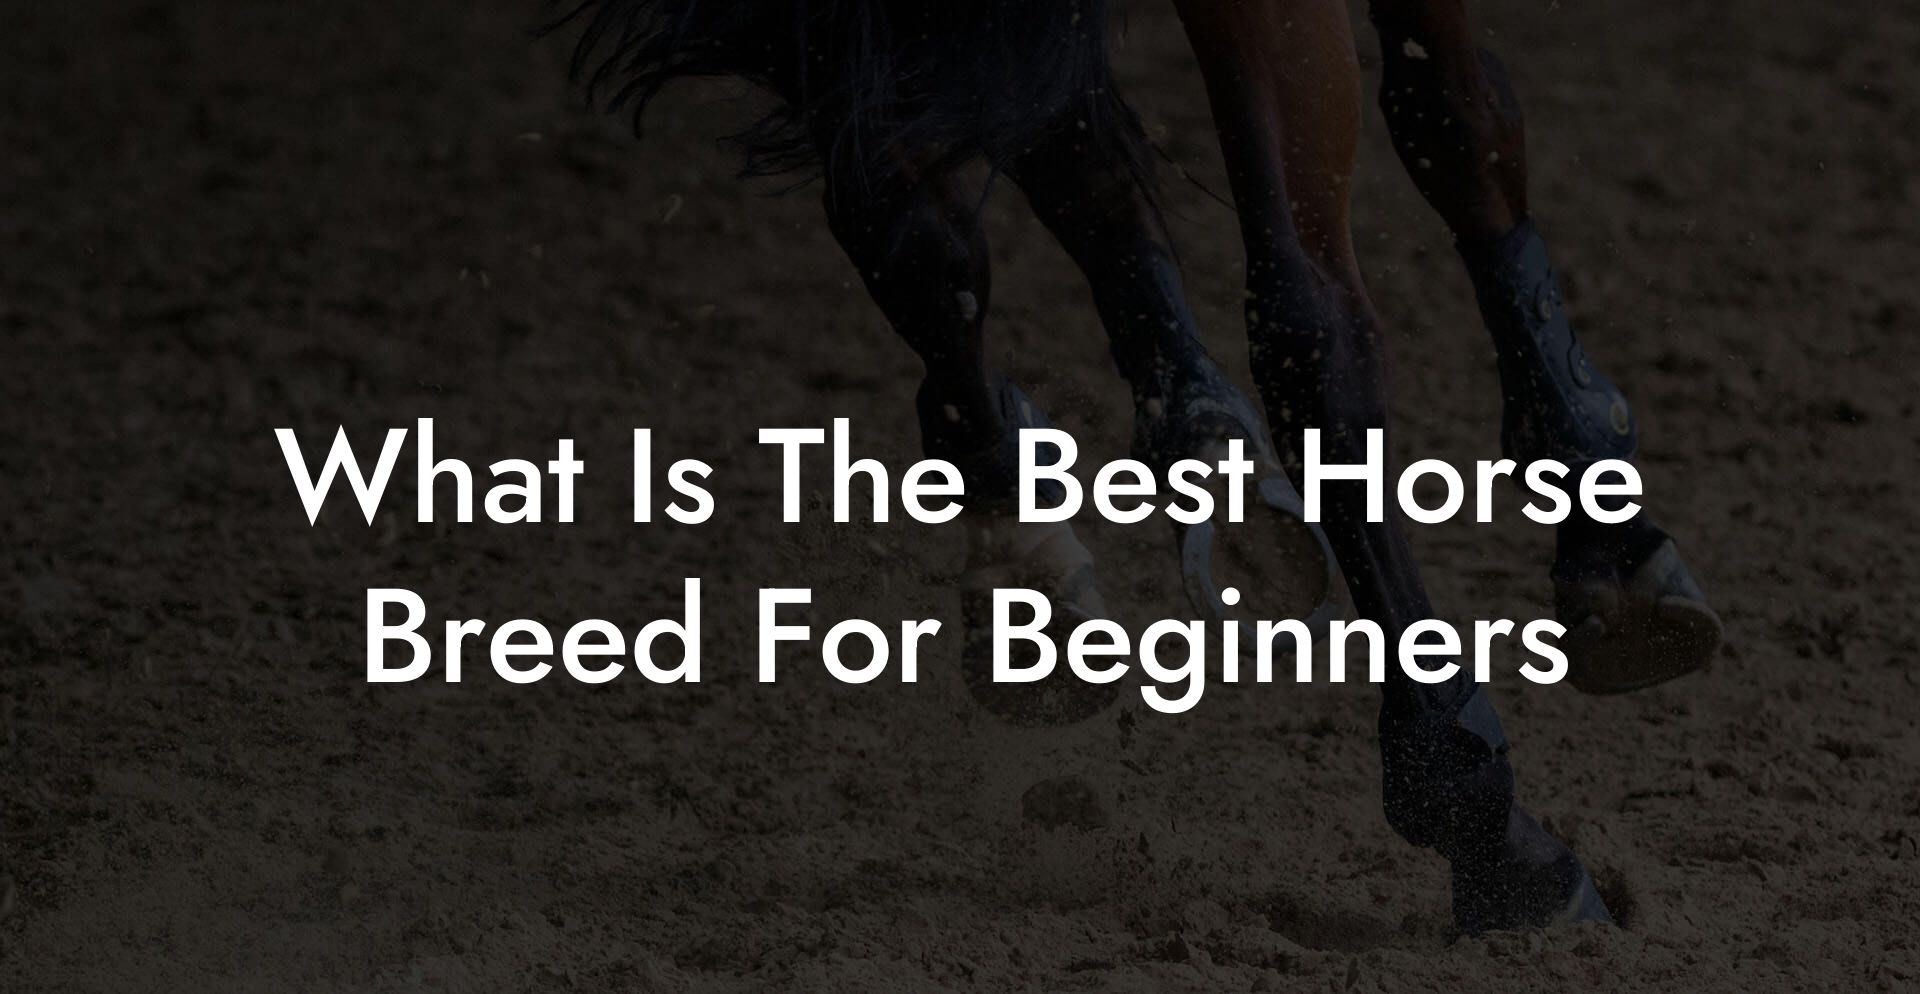 What Is The Best Horse Breed For Beginners